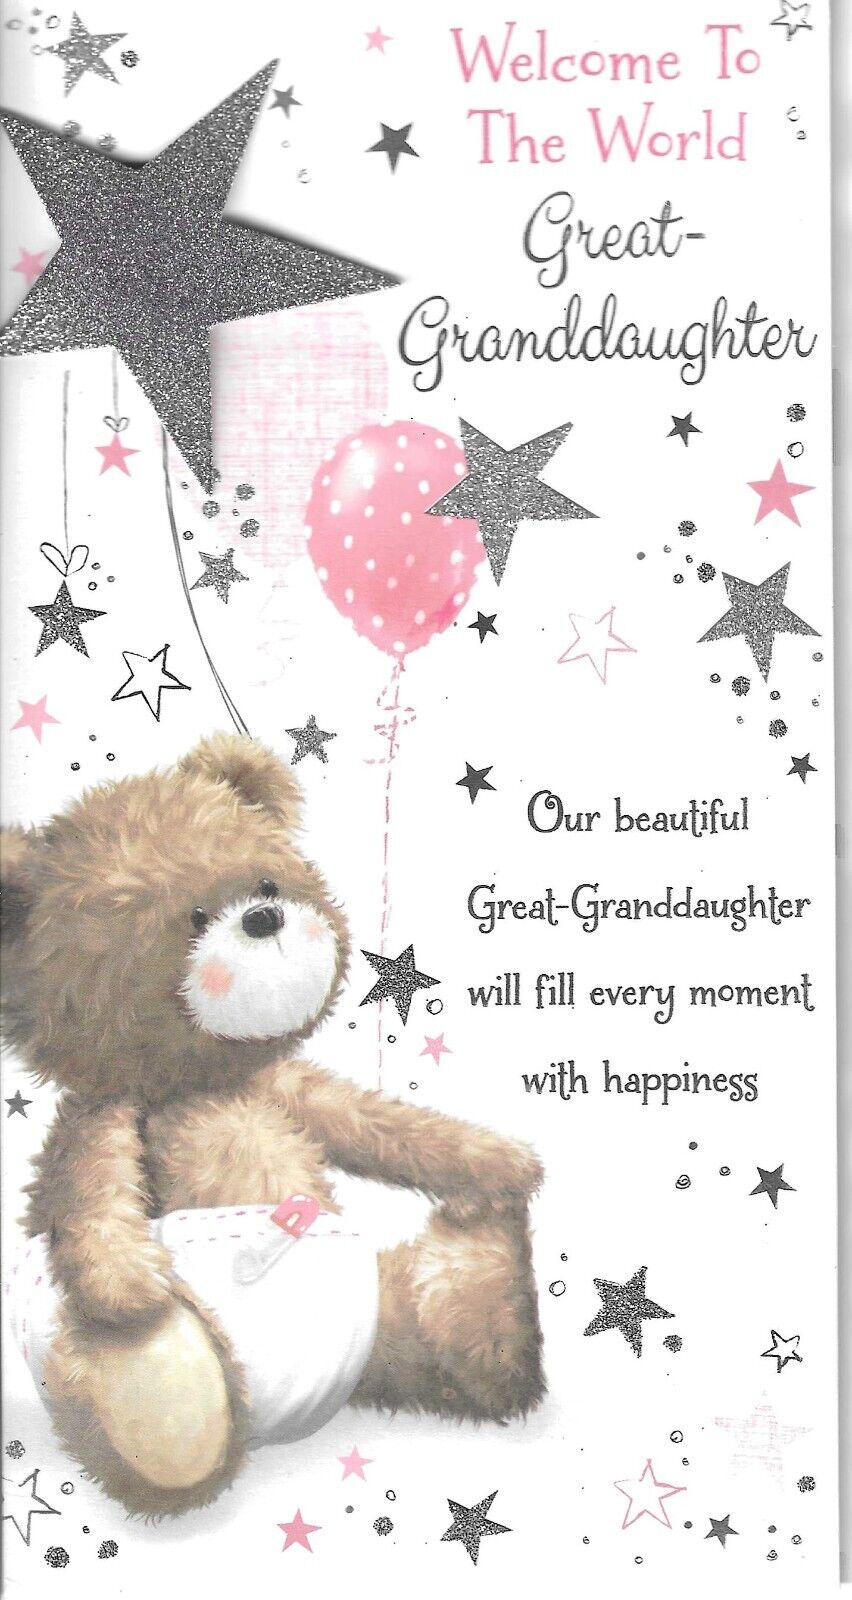 Prelude ''Welcome To The World Great Granddaughter'' Card RRP £2.99 CLEARANCE XL £1.99